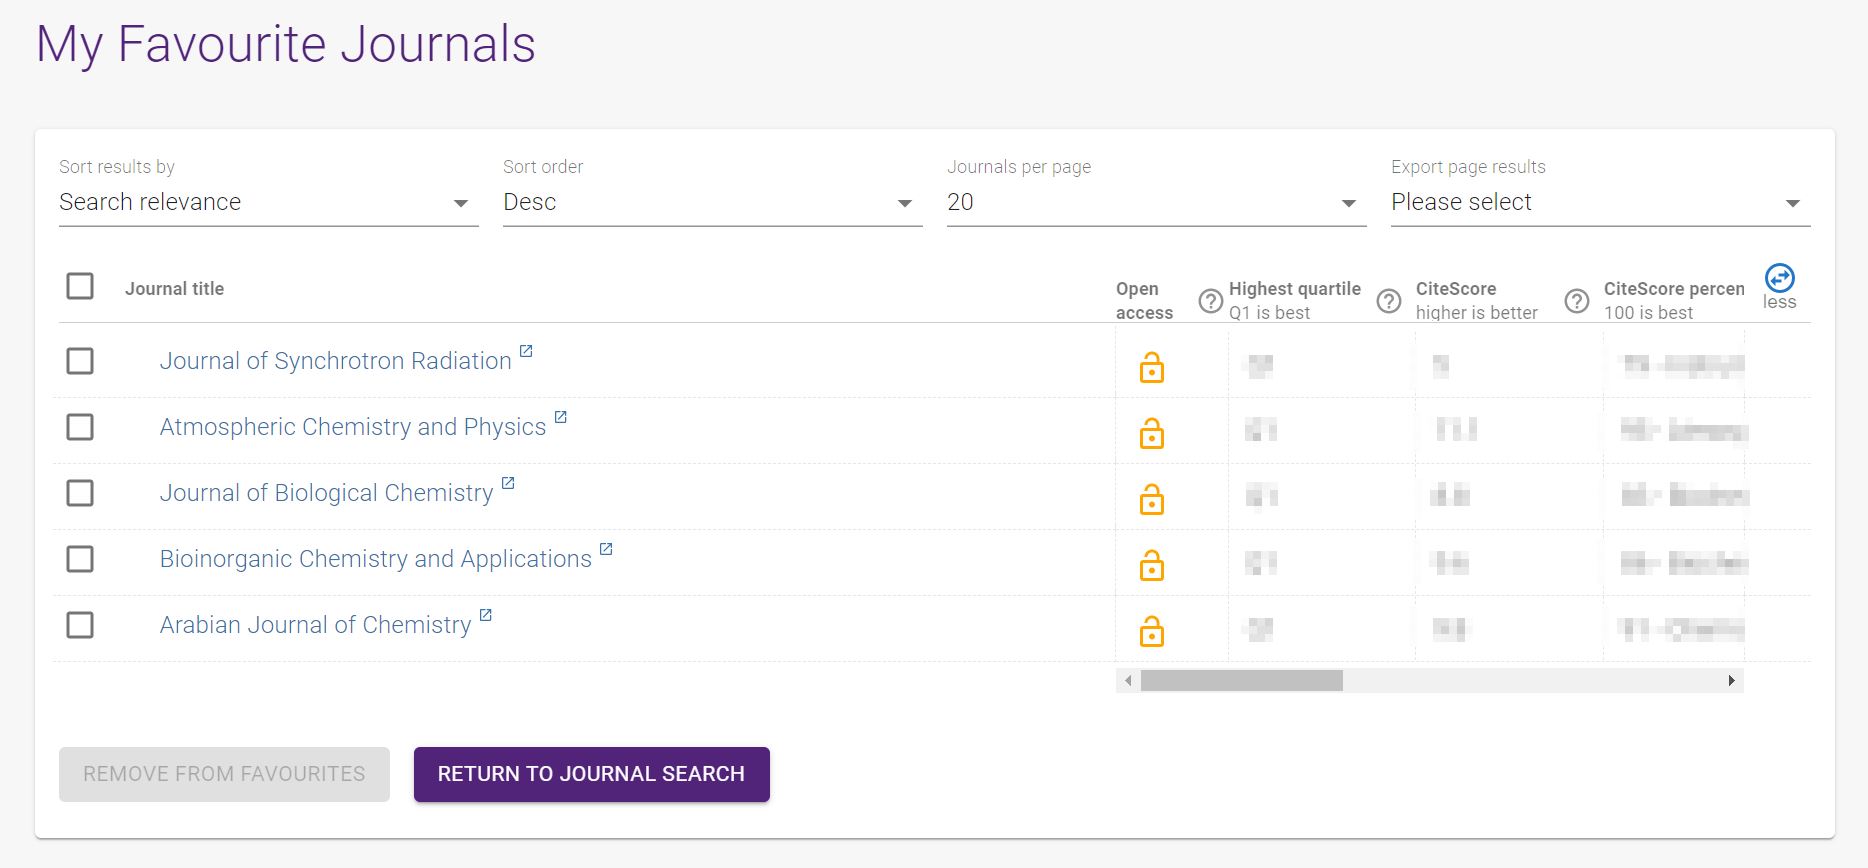 Journal search - My Favourite Journals screen. List of favourited journals and table of metrics for comparison.